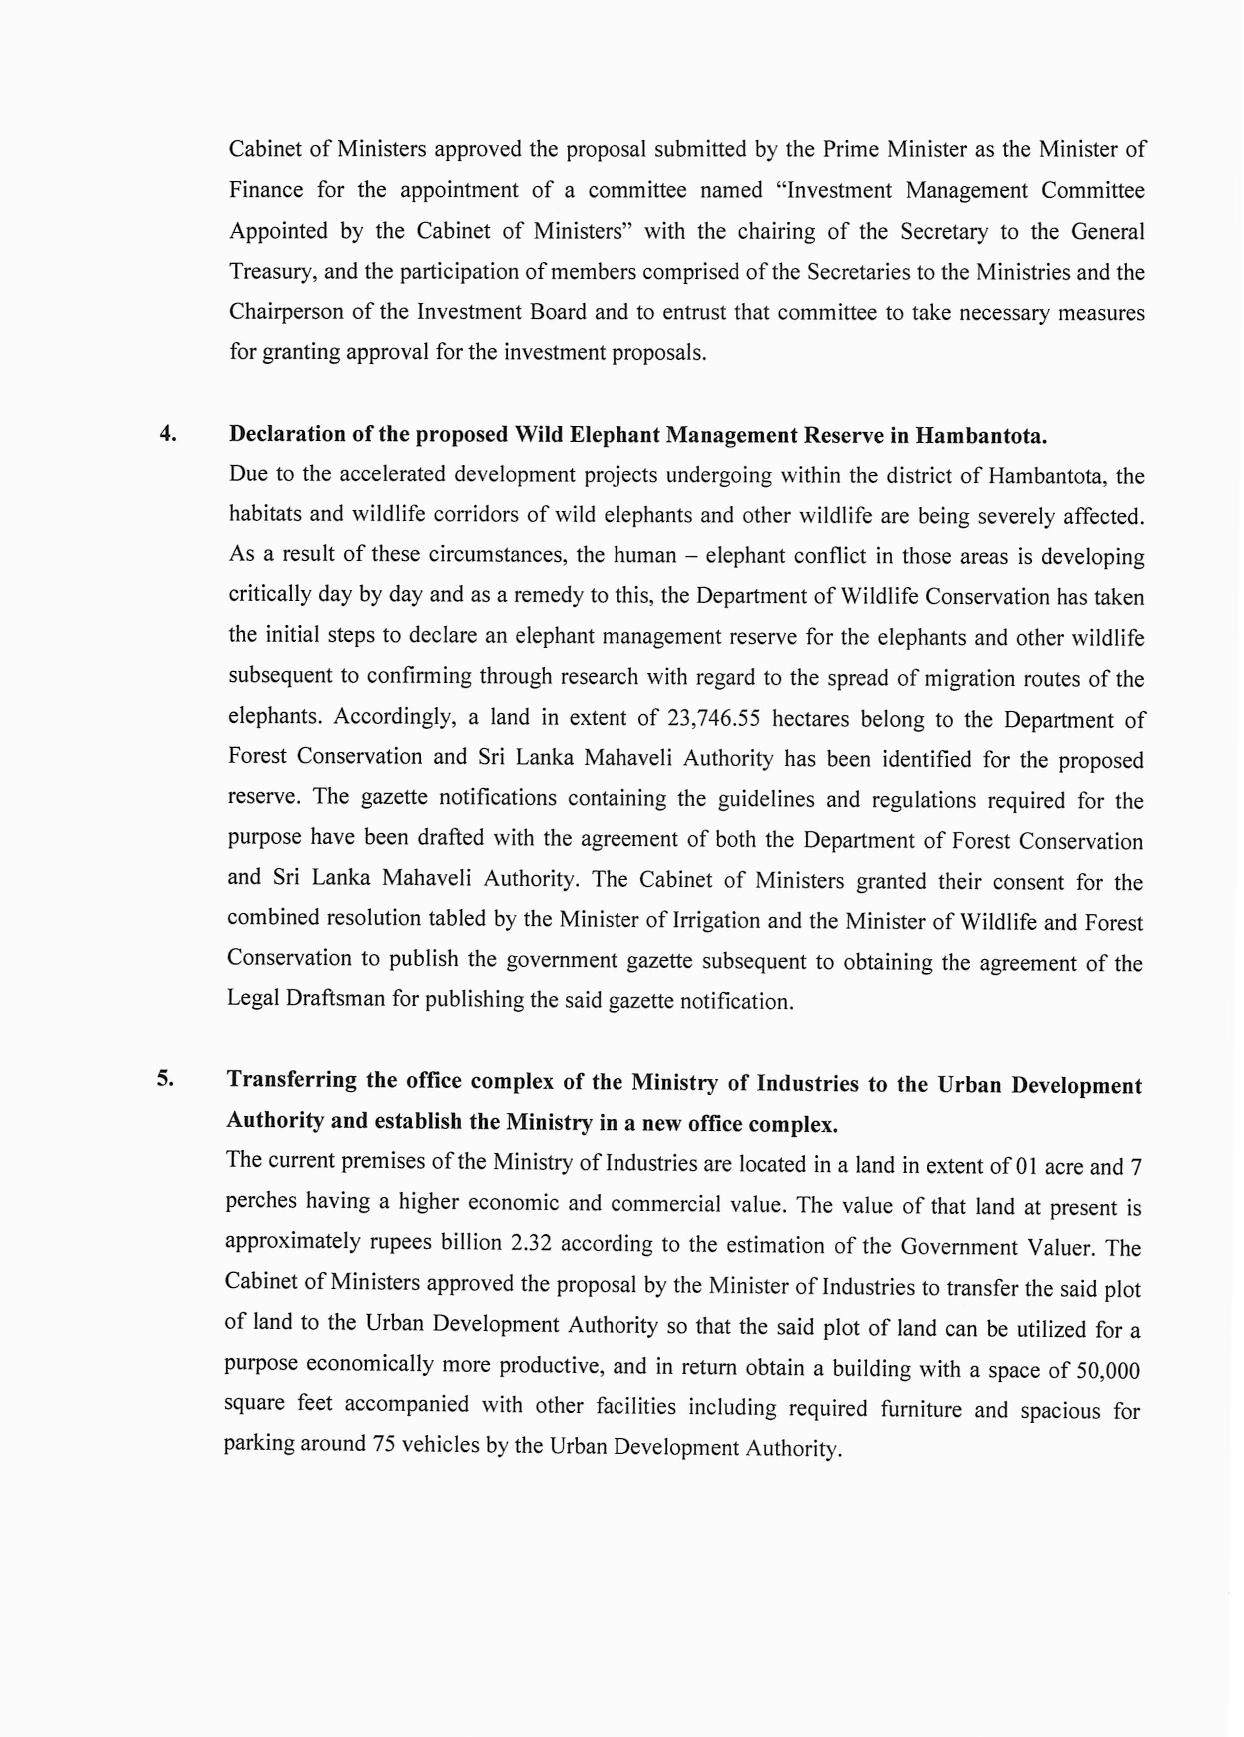 Cabinet Decision on 22.02.2021 Englihs page 002